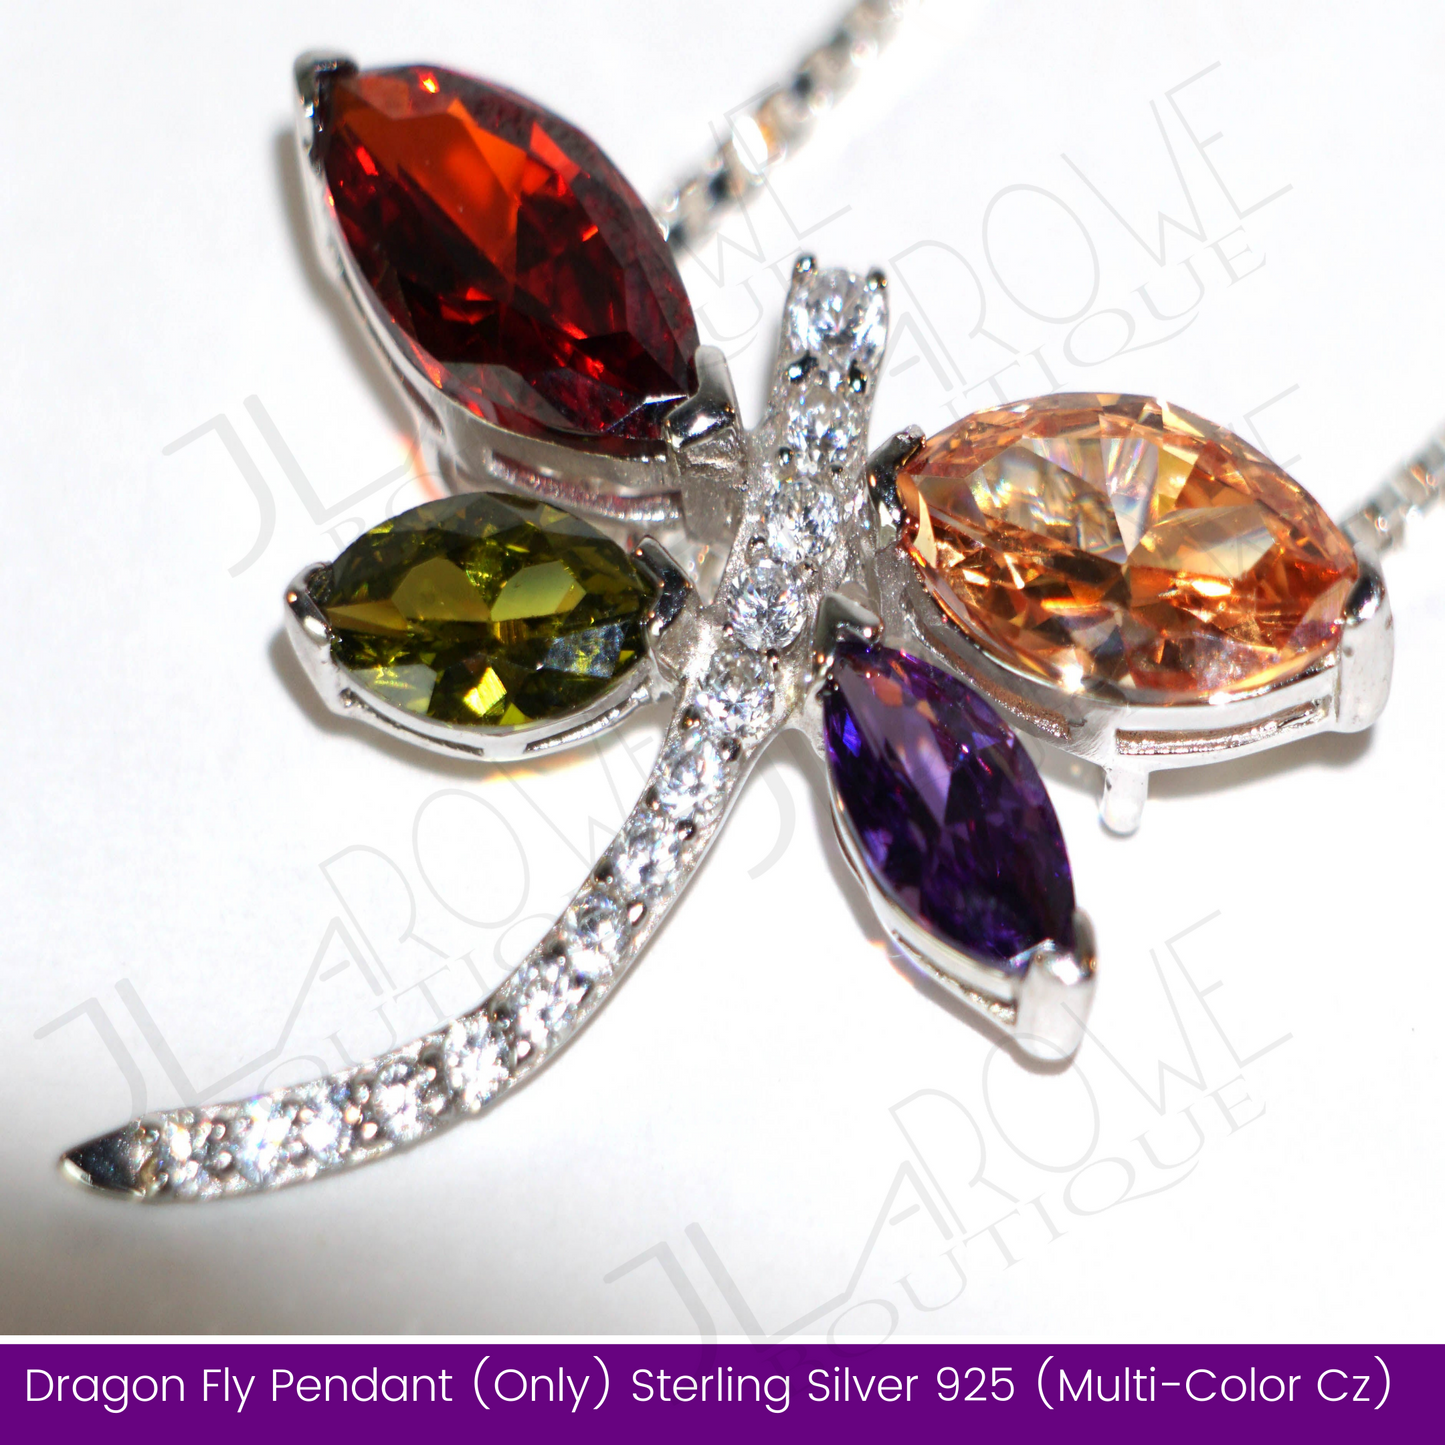 Dragon Fly Pendant (Only) Sterling Silver 925 (Multi-Color Cz) (Limited Stock)